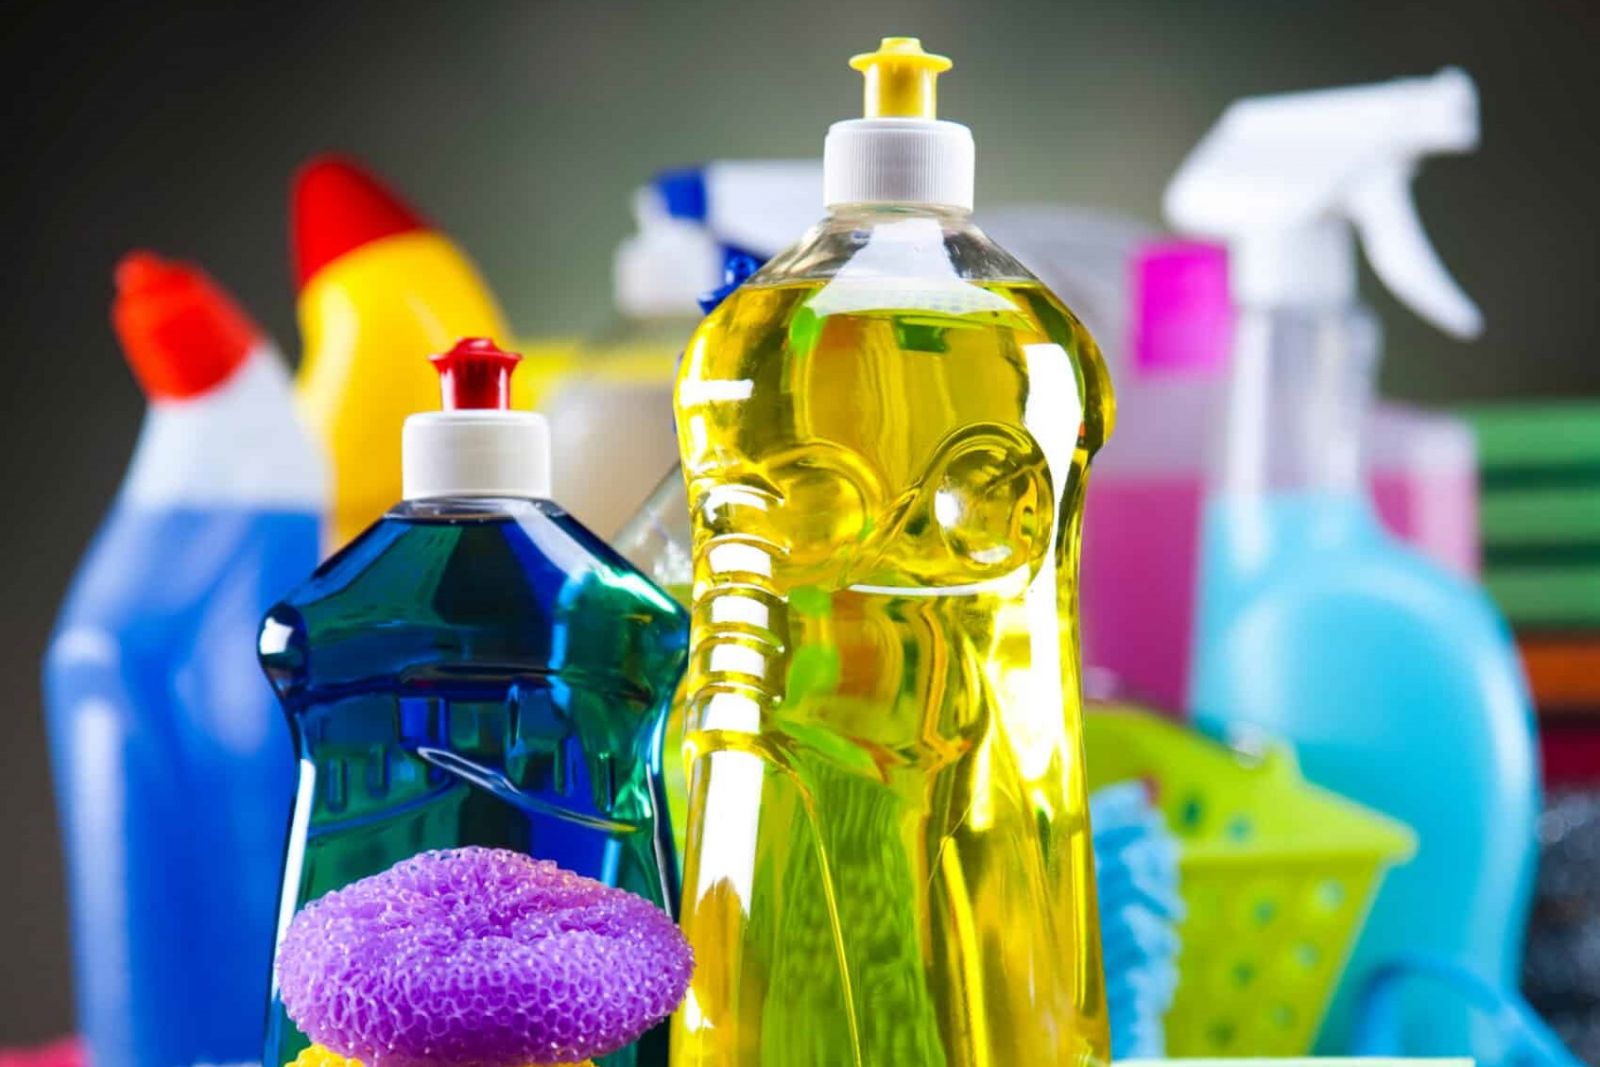 Assorted common household cleaning and disinfecting products